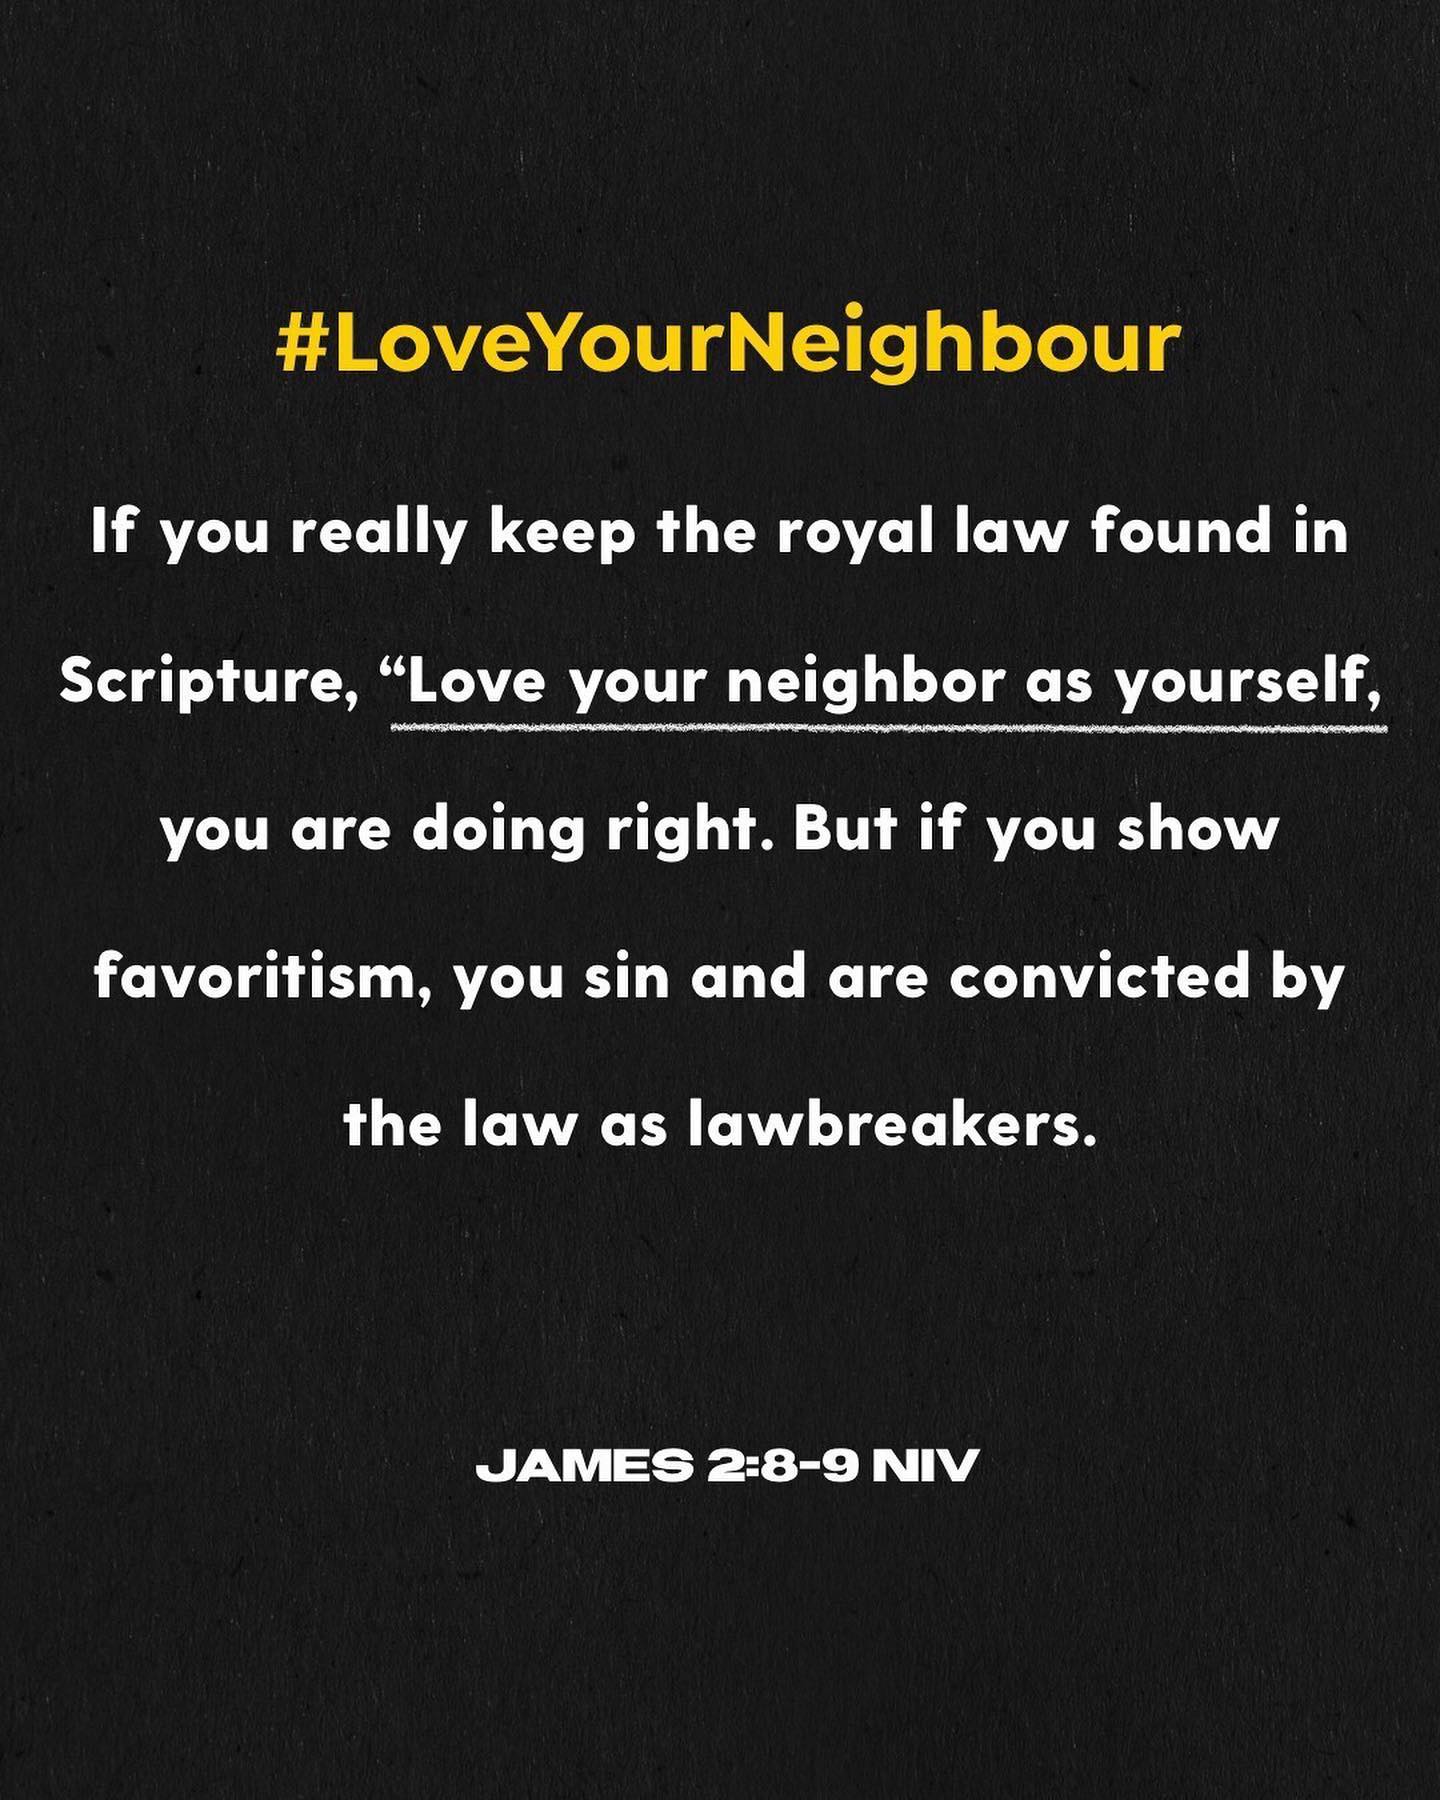 Featured image for “Let’s Love Our Neighbors!”